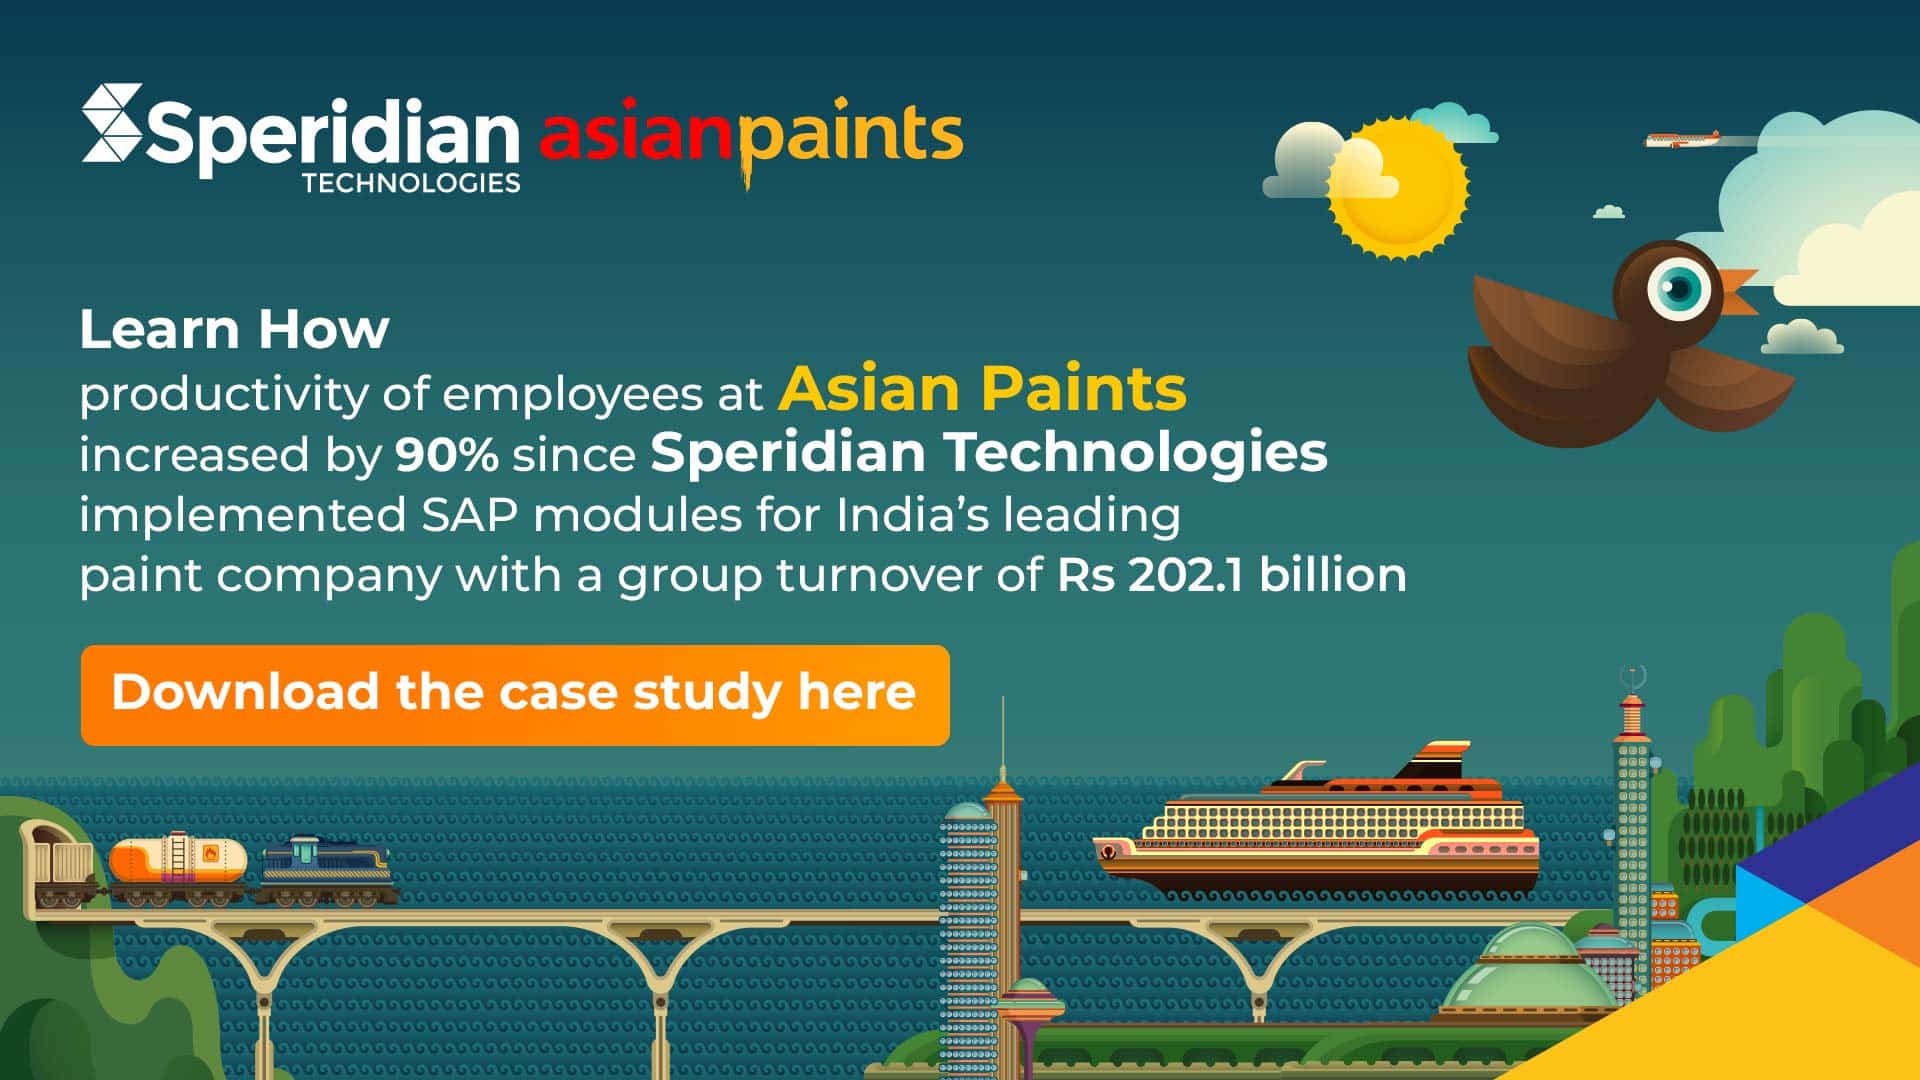 Speridian’s business intelligence solution using the SAP SuccessFactors tools helped Asian Paints reduce costs and improve business productivity.